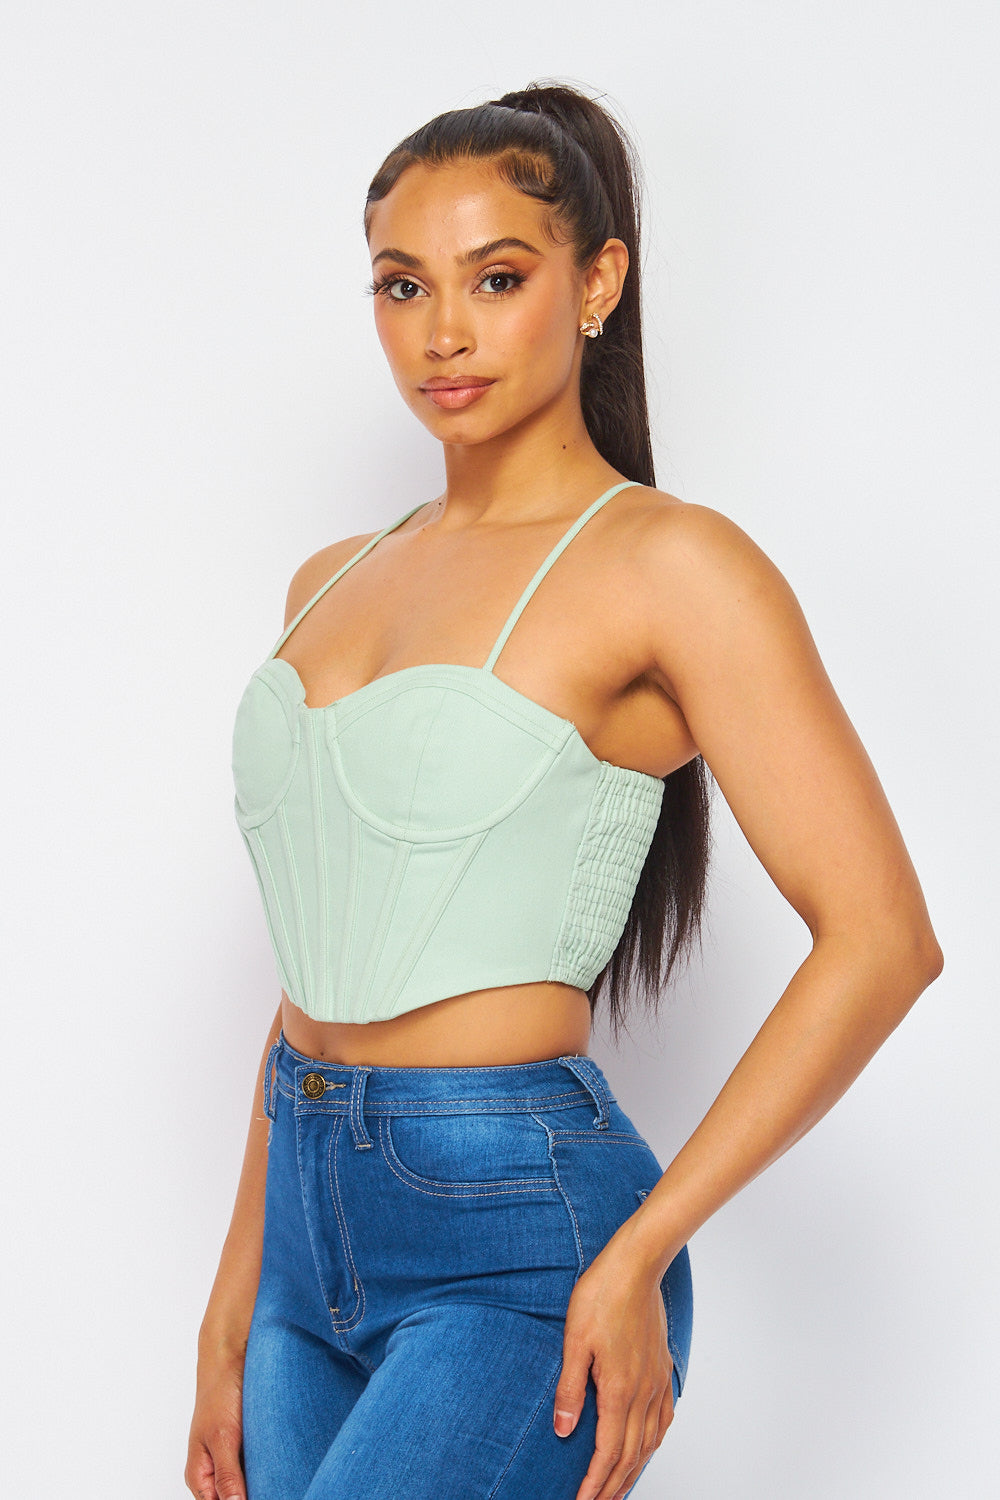 There She Goes Bustier Corset Cami Crop Top